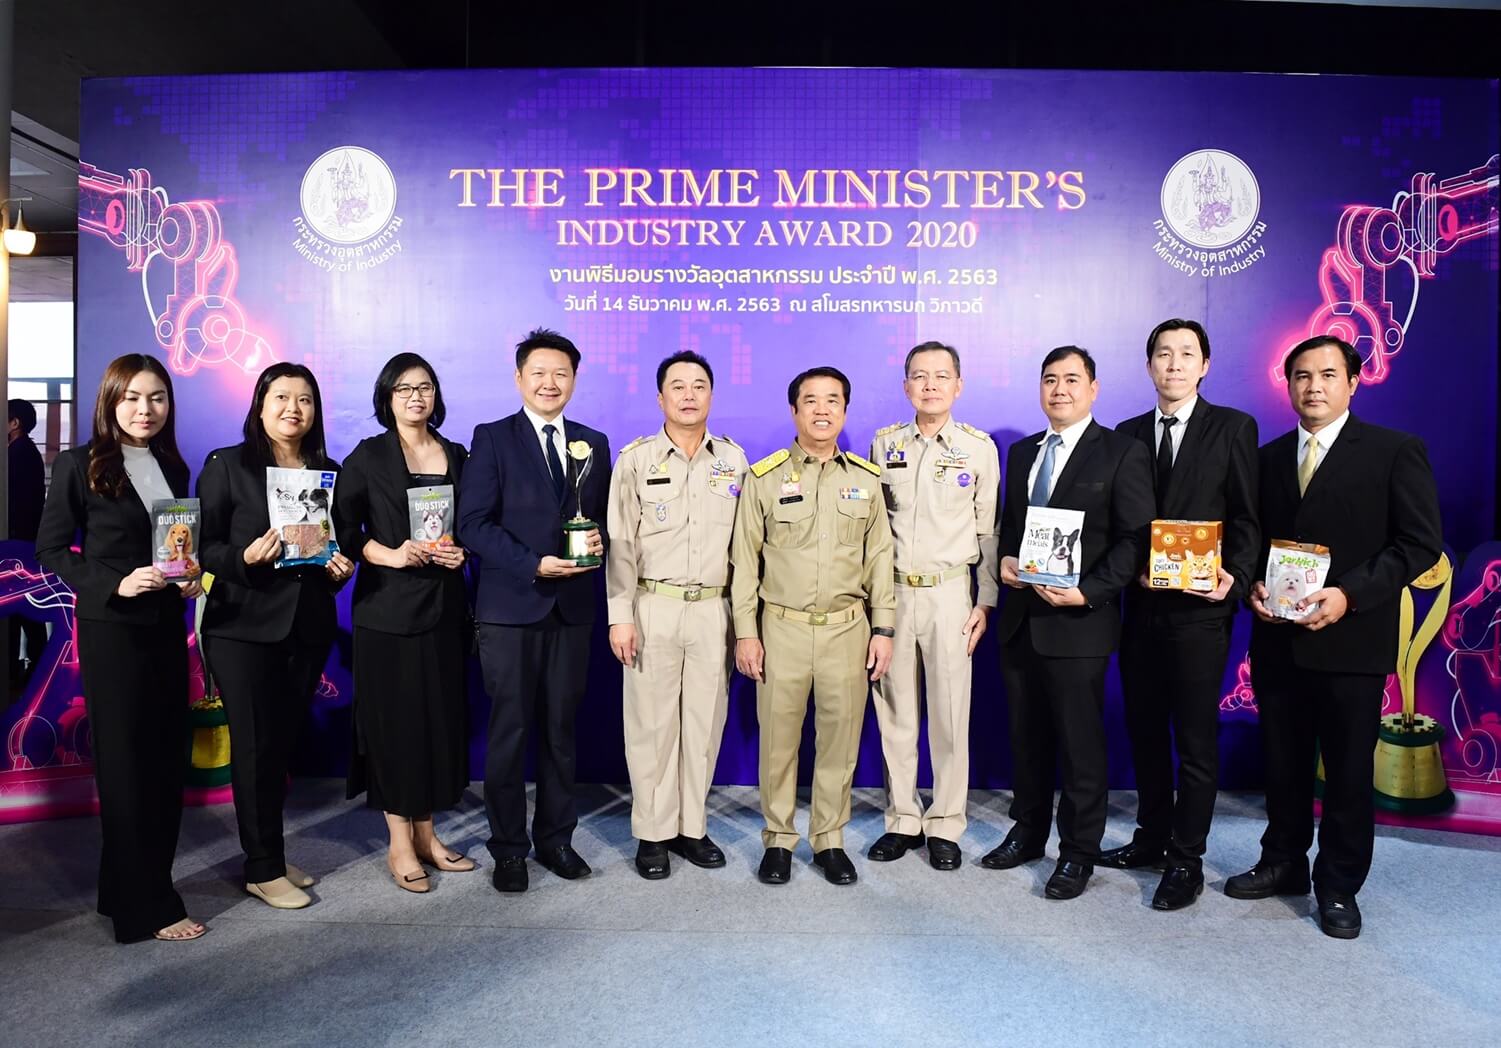 International Pet Food wins the Prime Minister's Industry Award 2020